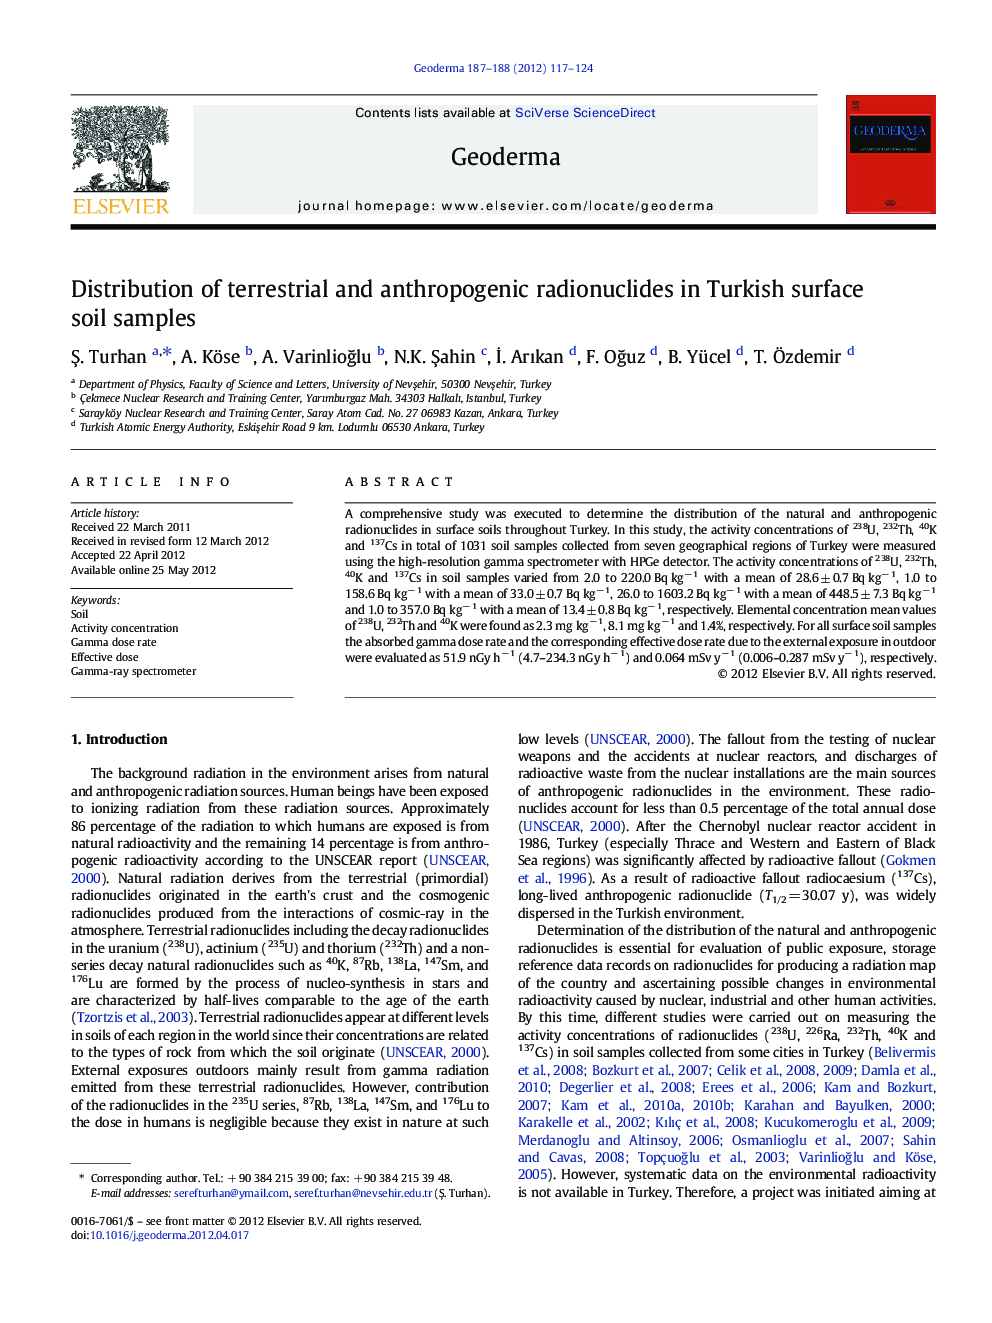 Distribution of terrestrial and anthropogenic radionuclides in Turkish surface soil samples